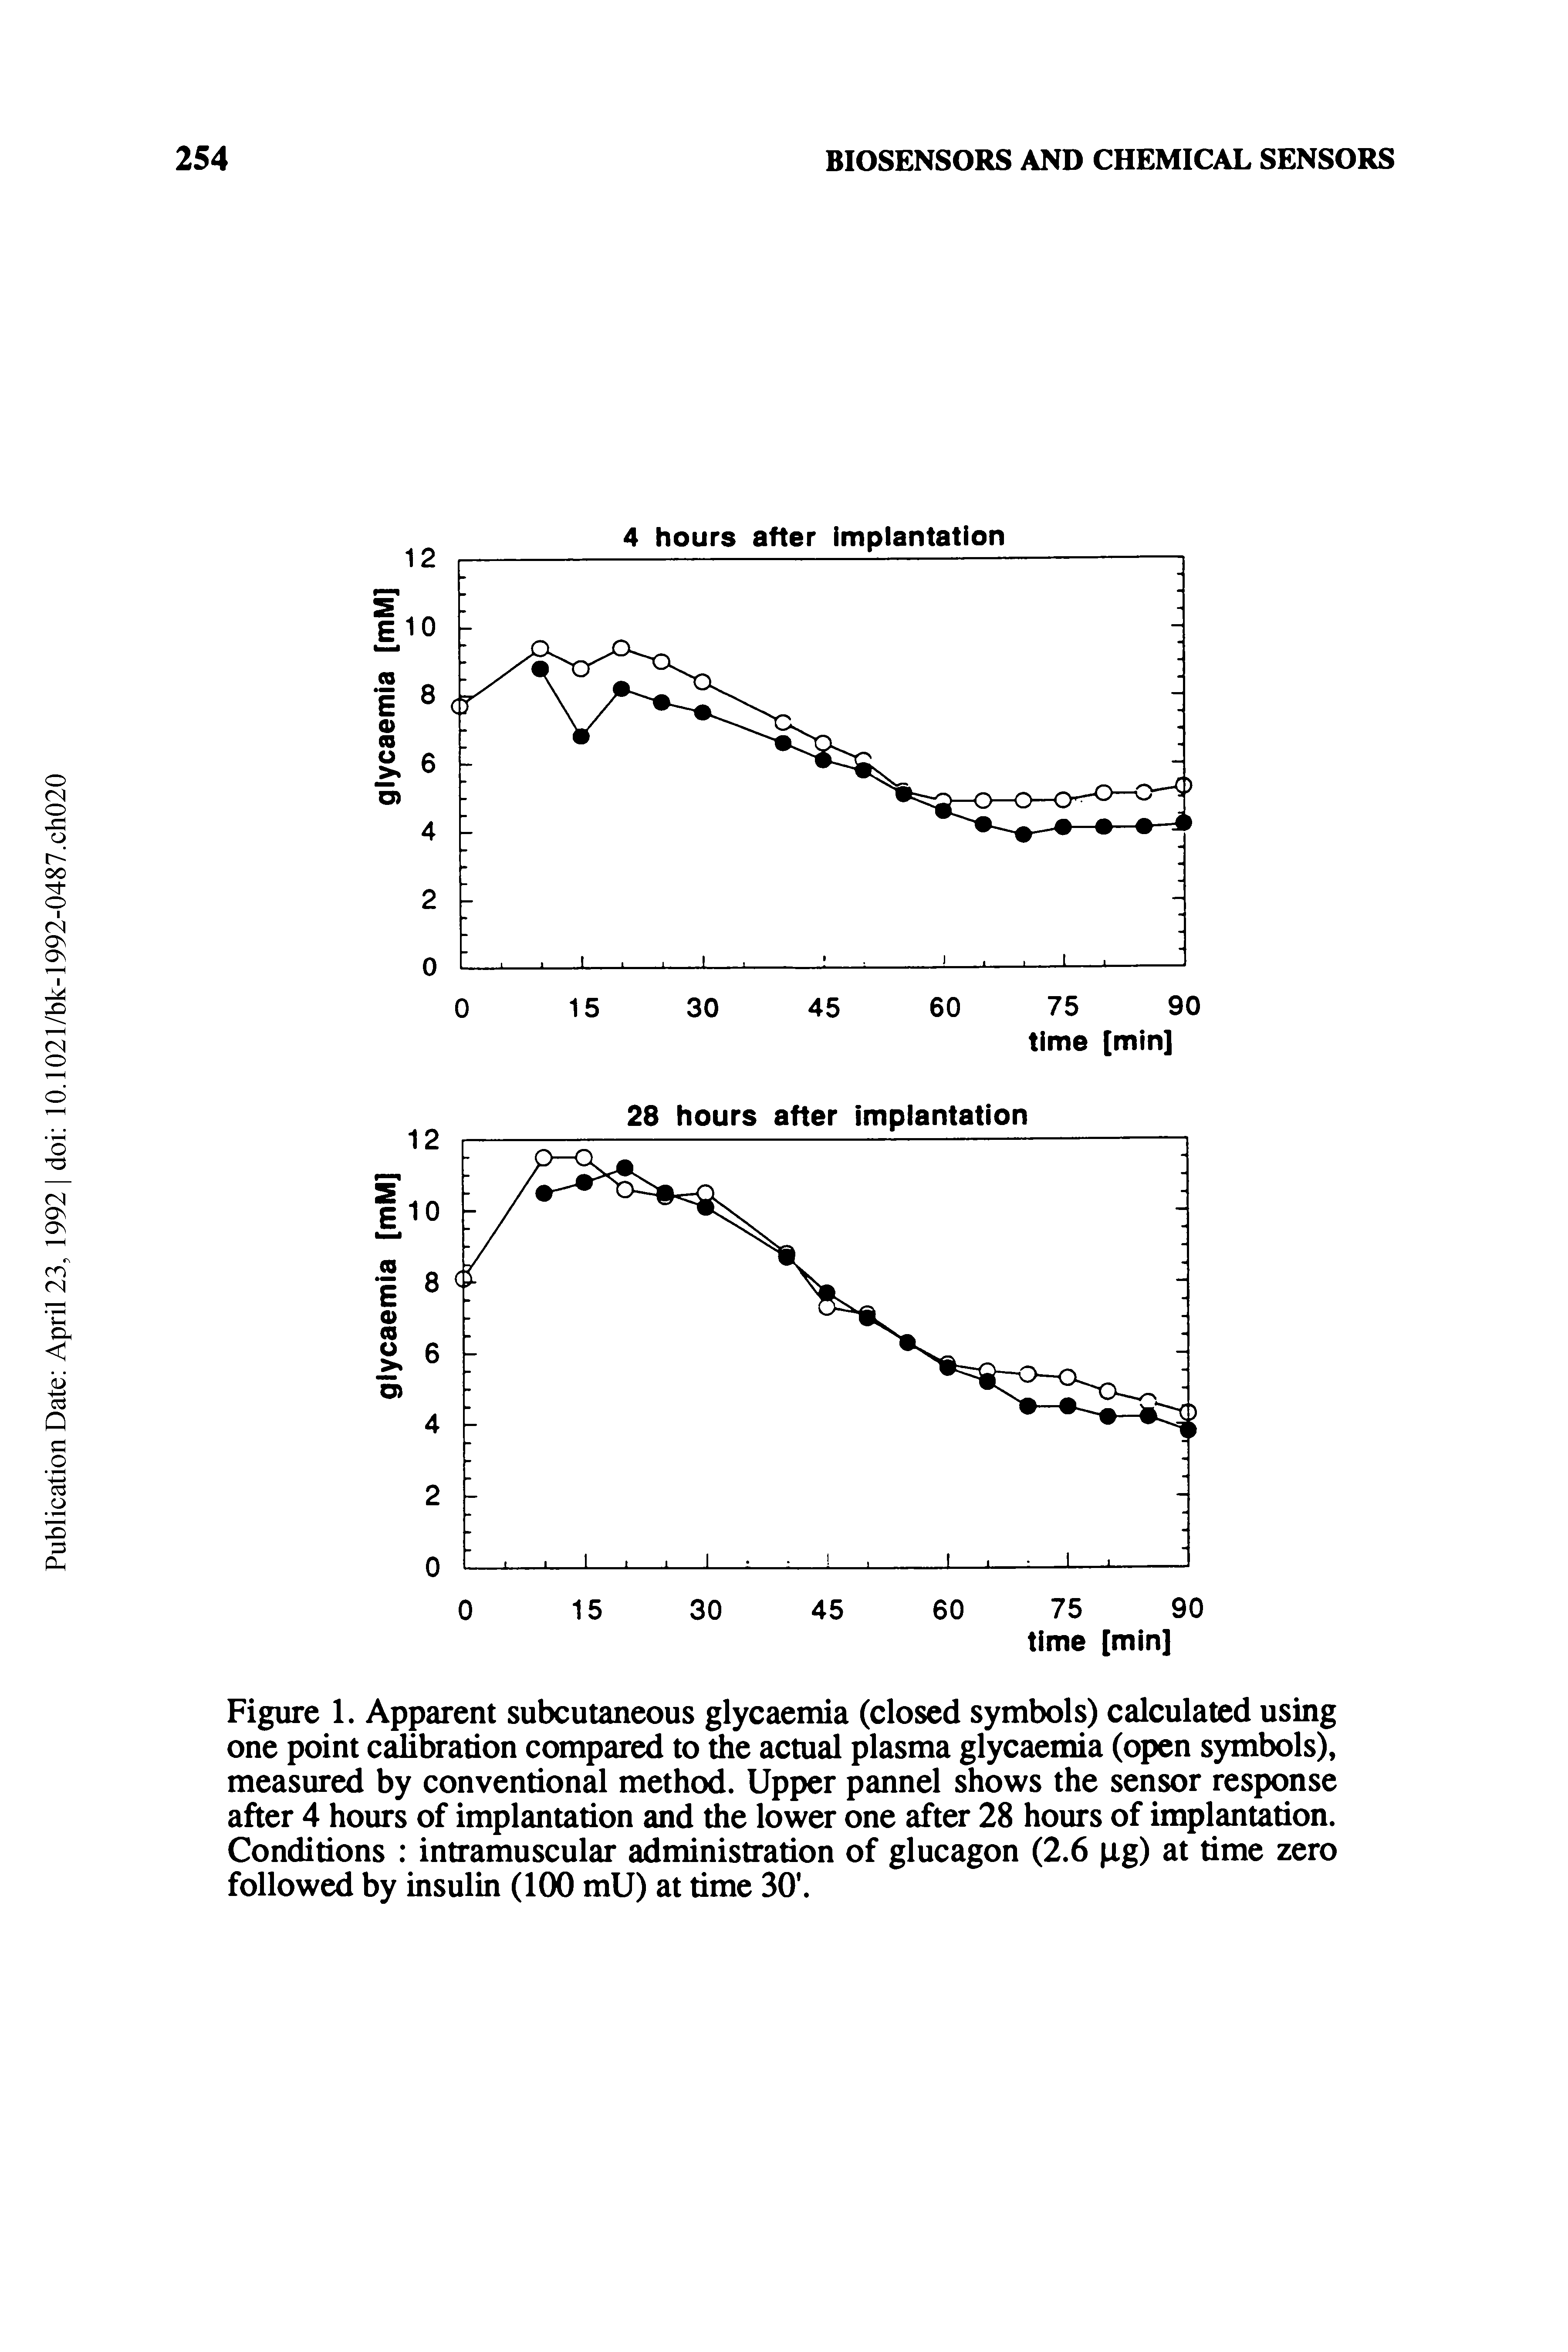 Figure 1. Apparent subcutaneous glycaemia (closed symbols) calculated using one point calibration compared to the actual plasma glycaemia (open symbols), measured by conventional method. Upper pannel shows the sensor response after 4 hours of implantation and the lower one after 28 hours of implantation. Conditions intramuscular administration of glucagon (2.6 ig) at time zero followed by insulin (100 mU) at time 30. ...